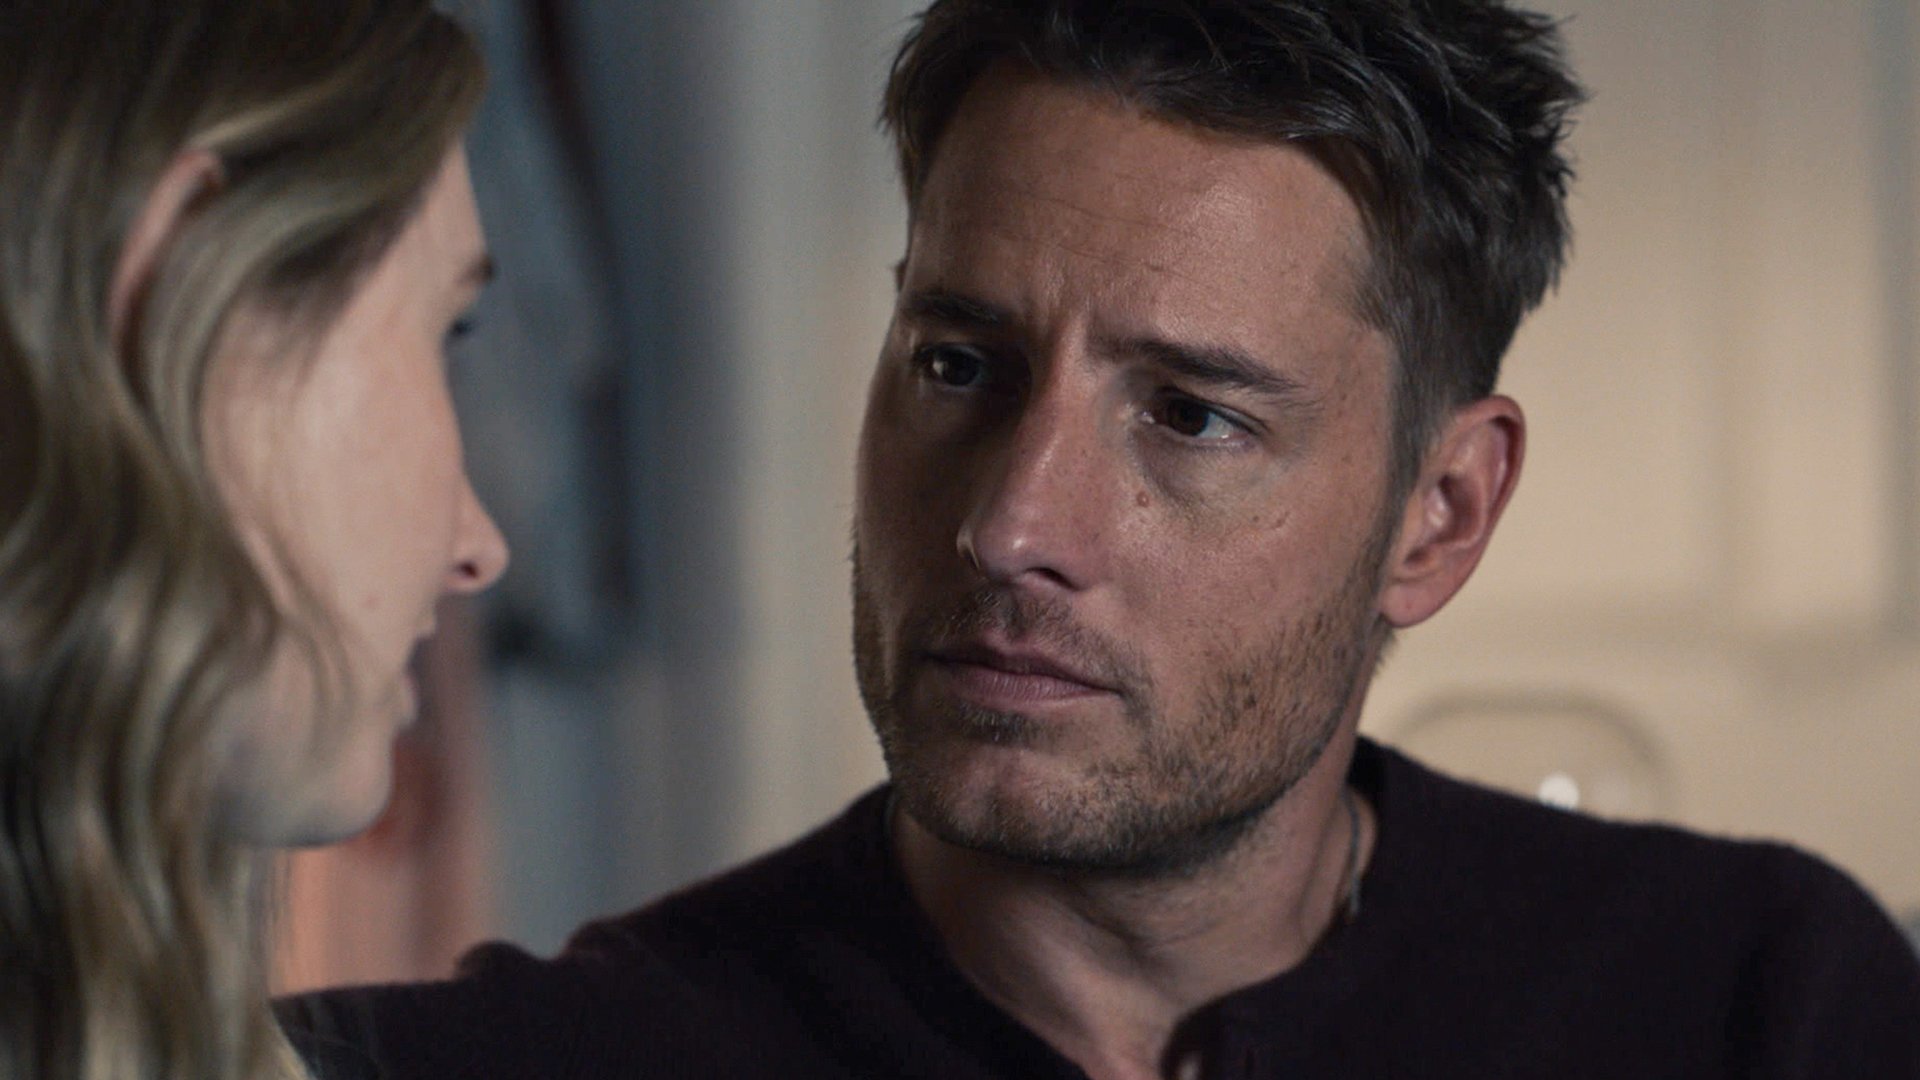 Caitlin Thompson as Madison talking to Justin Hartley as Kevin in ‘This Is Us’ Season 5 Episode 12